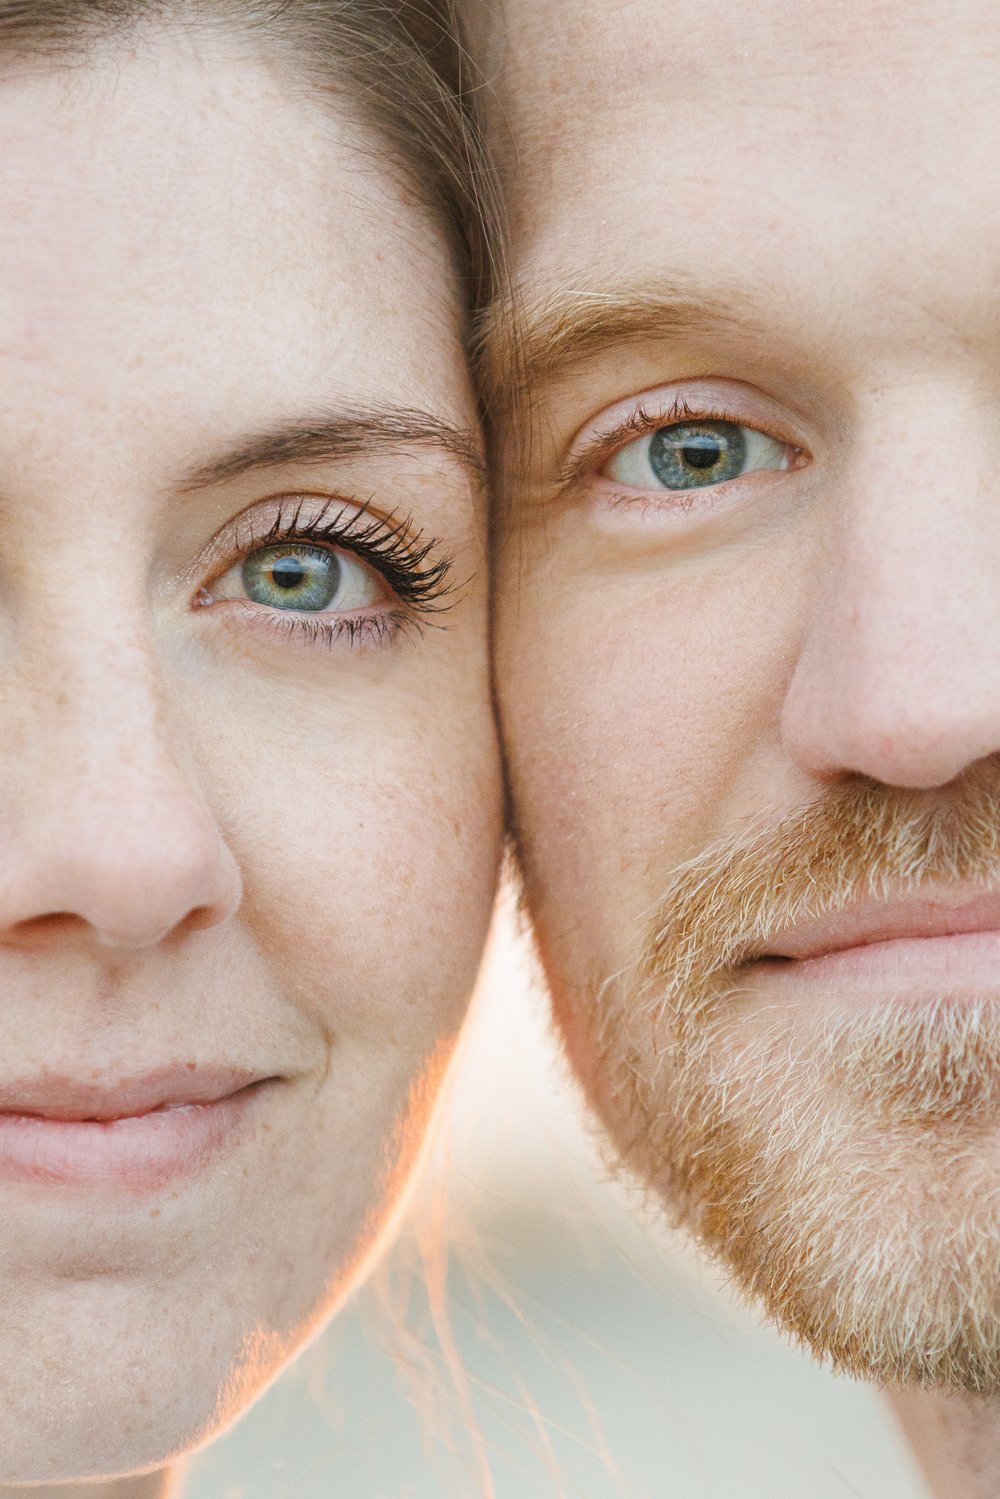  A detailed portrait of a couple's face half and half featuring their blue eyes by Savanna Richardson Photography in SLC, UT. close face portrait eye engagement shot #SavannaRichardsonPhotography #SavannaRichardsonEngagements #UtahEngagements #Antelo